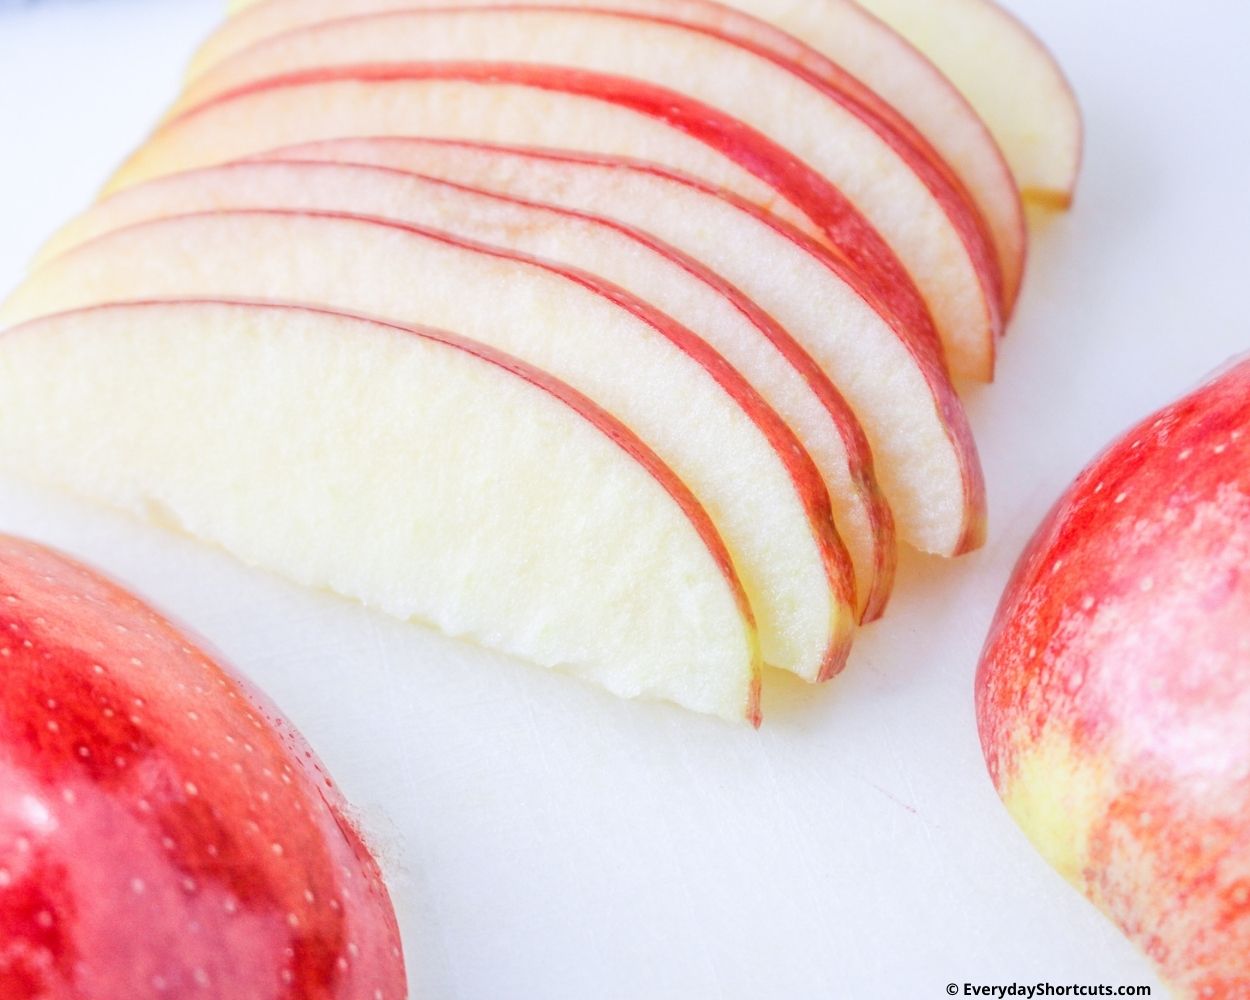 apples sliced thinly